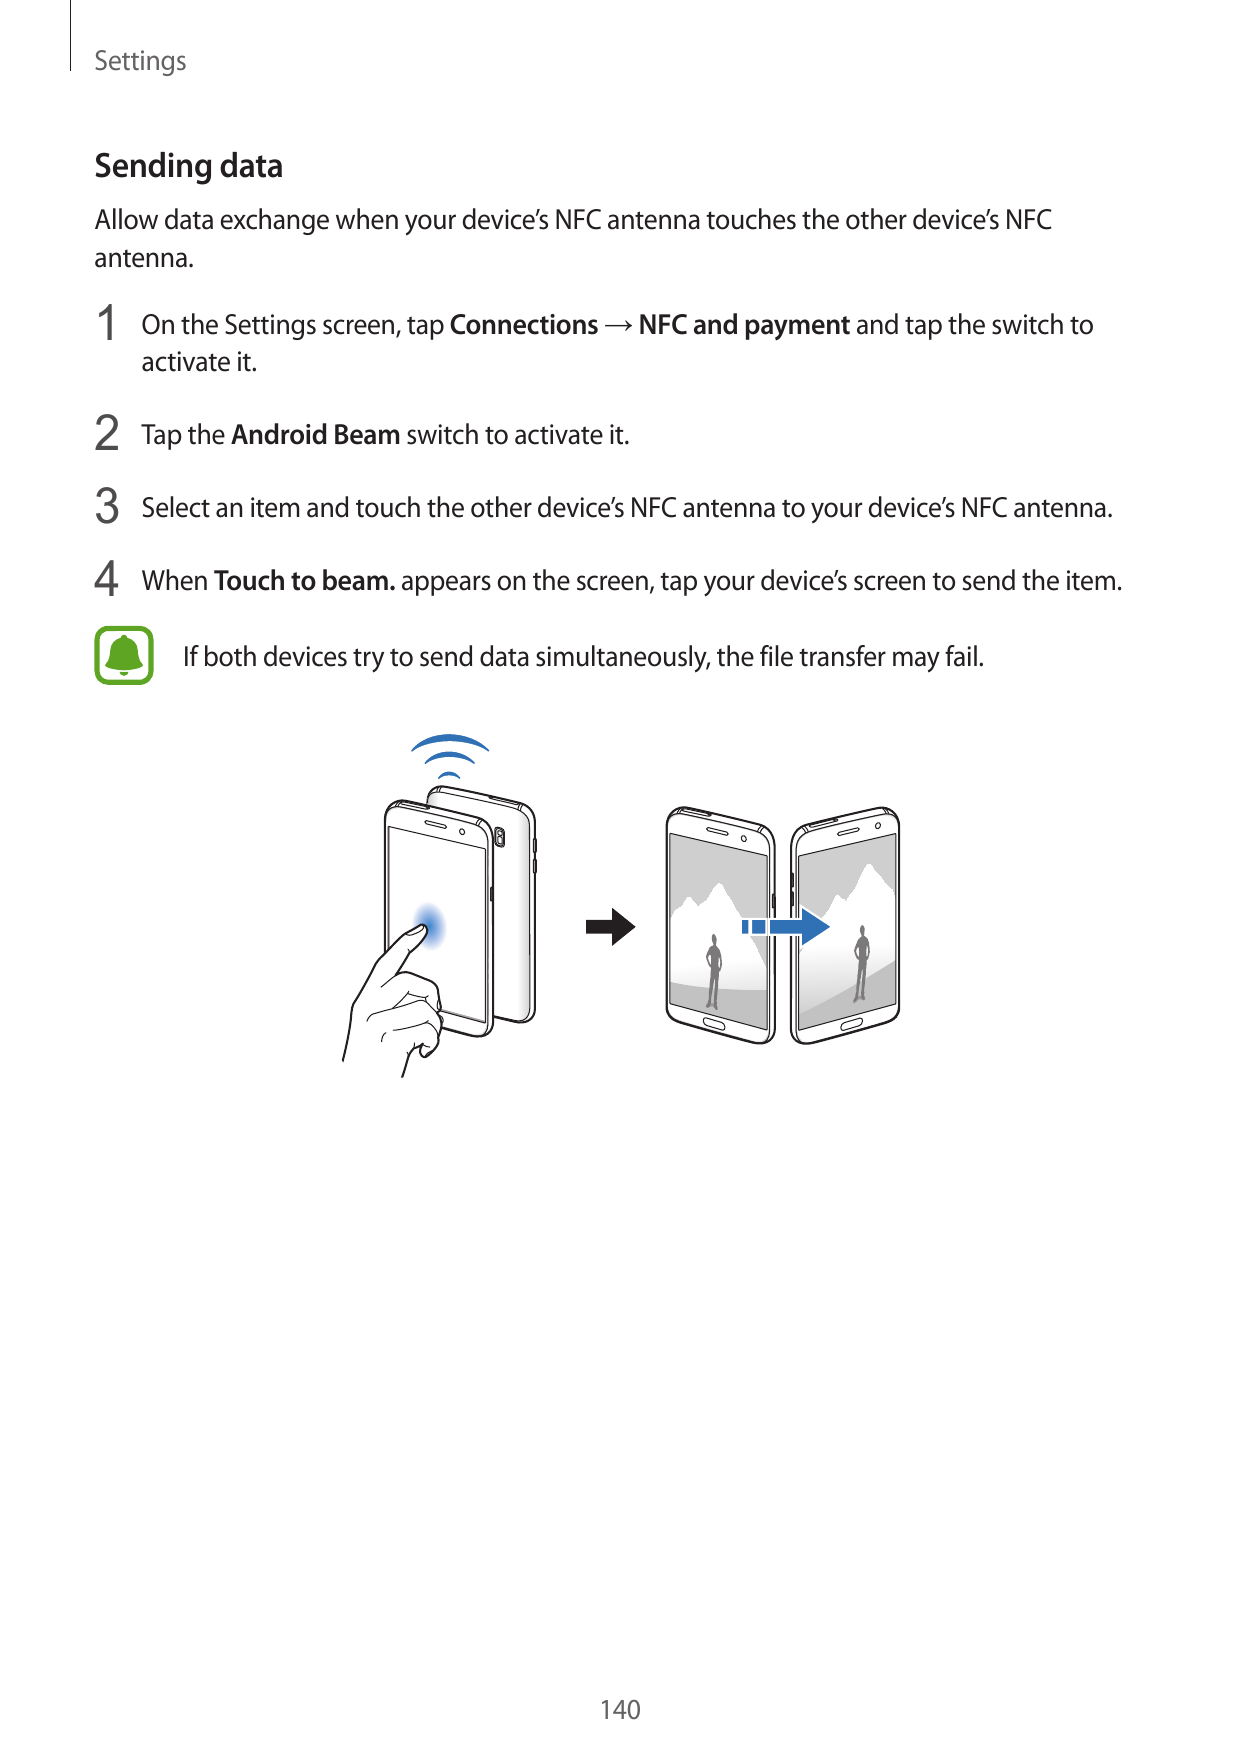 SettingsSending dataAllow data exchange when your device’s NFC antenna touches the other device’s NFCantenna.1 On the Settings s